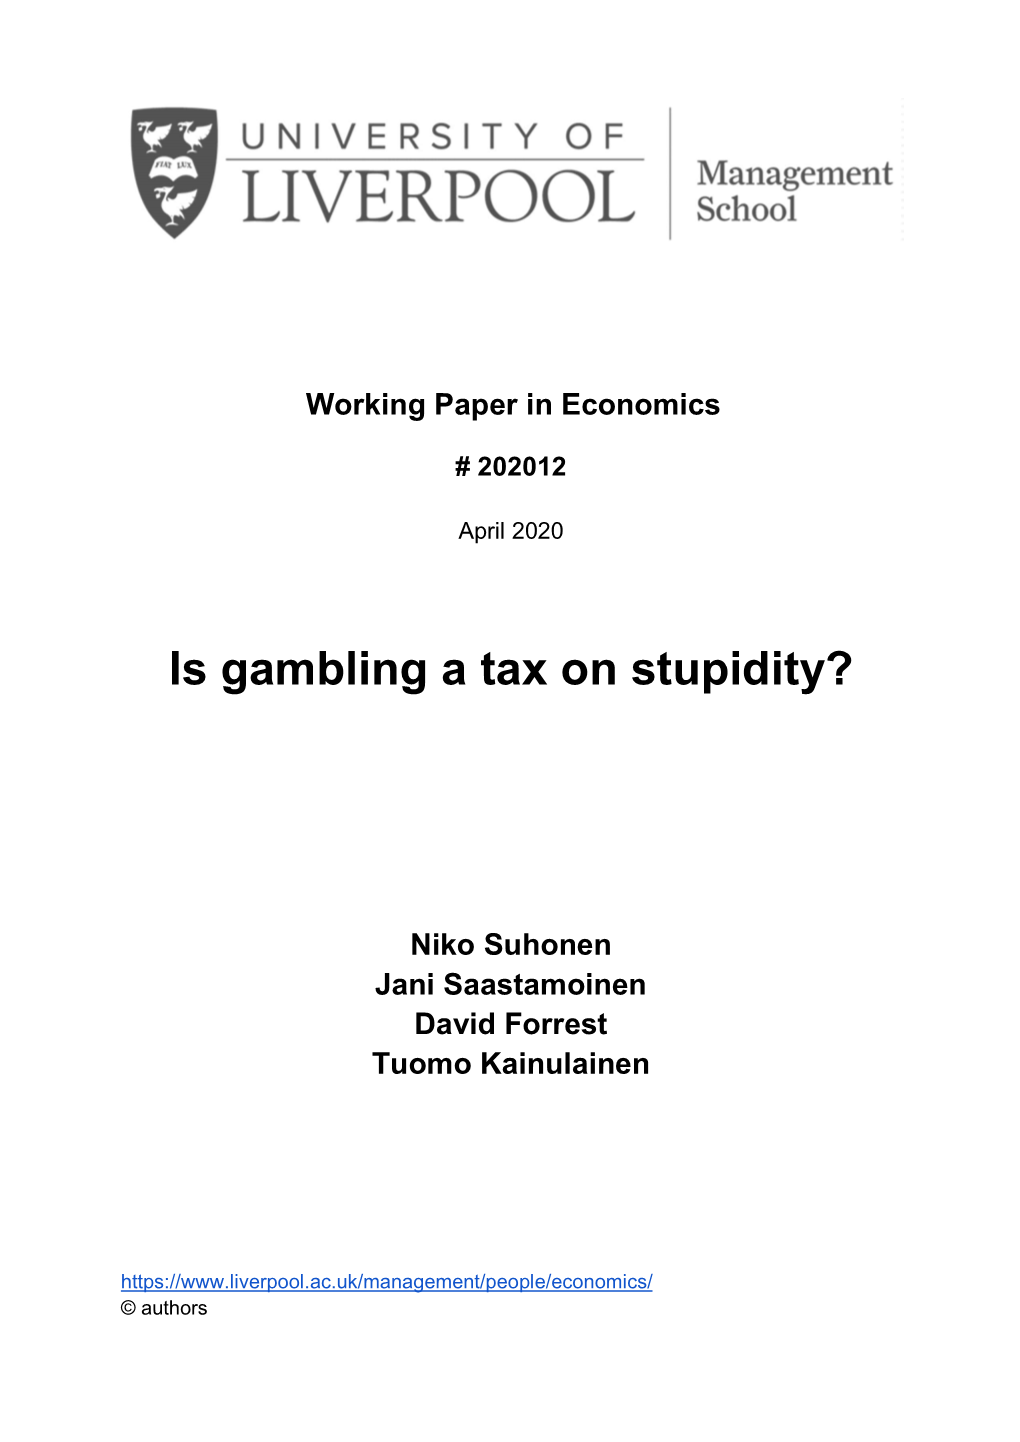 Is Gambling a Tax on Stupidity?